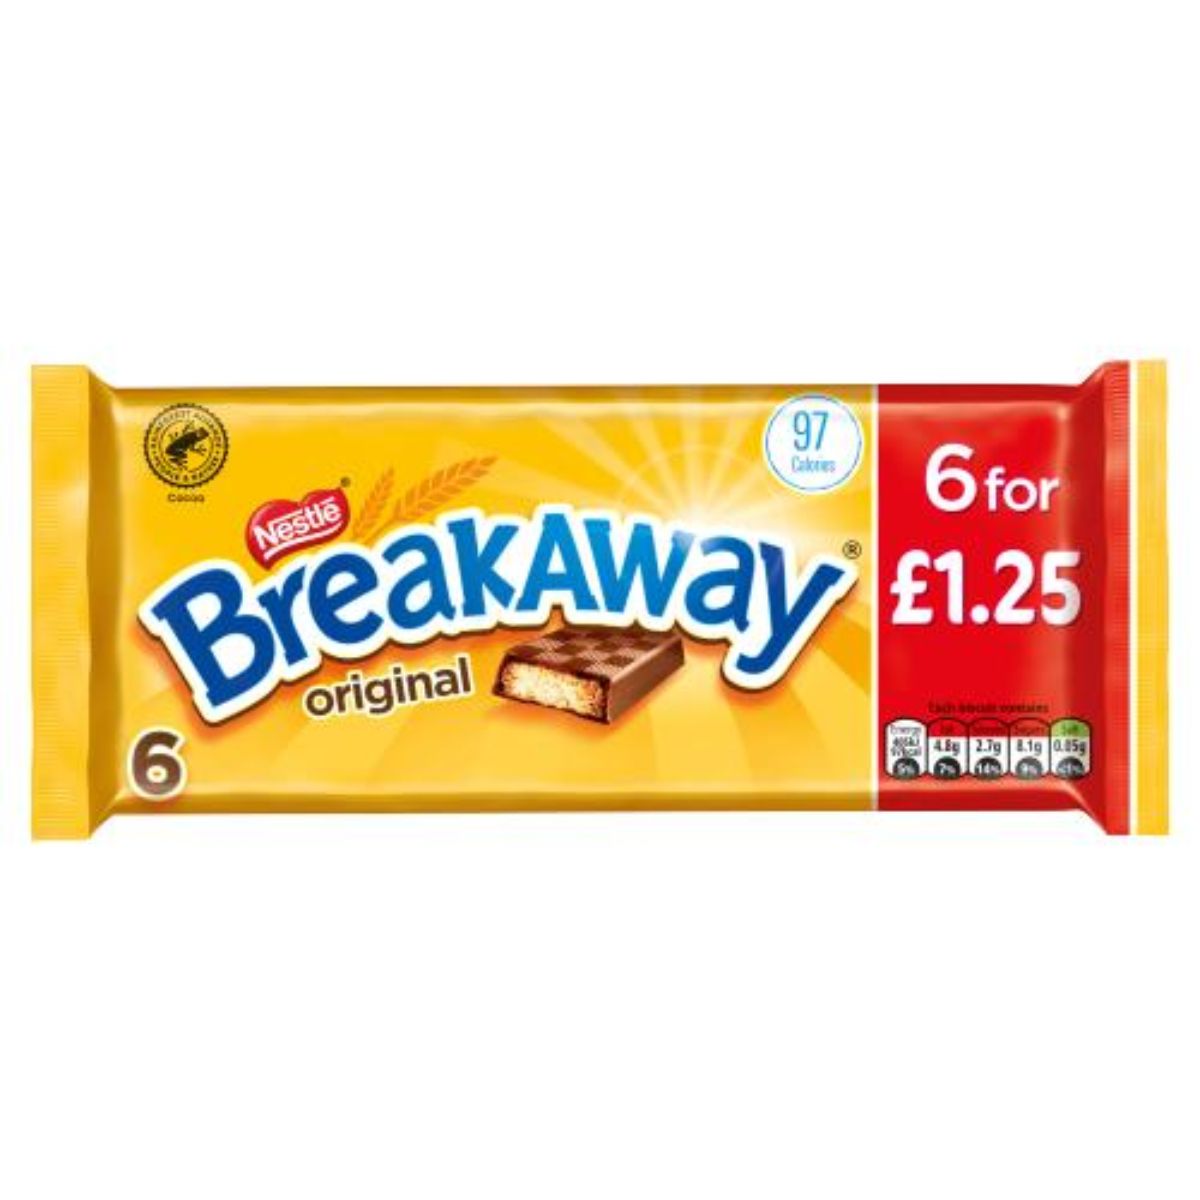 A bar of Nestle - Breakaway Original - 6 pack on a white background.